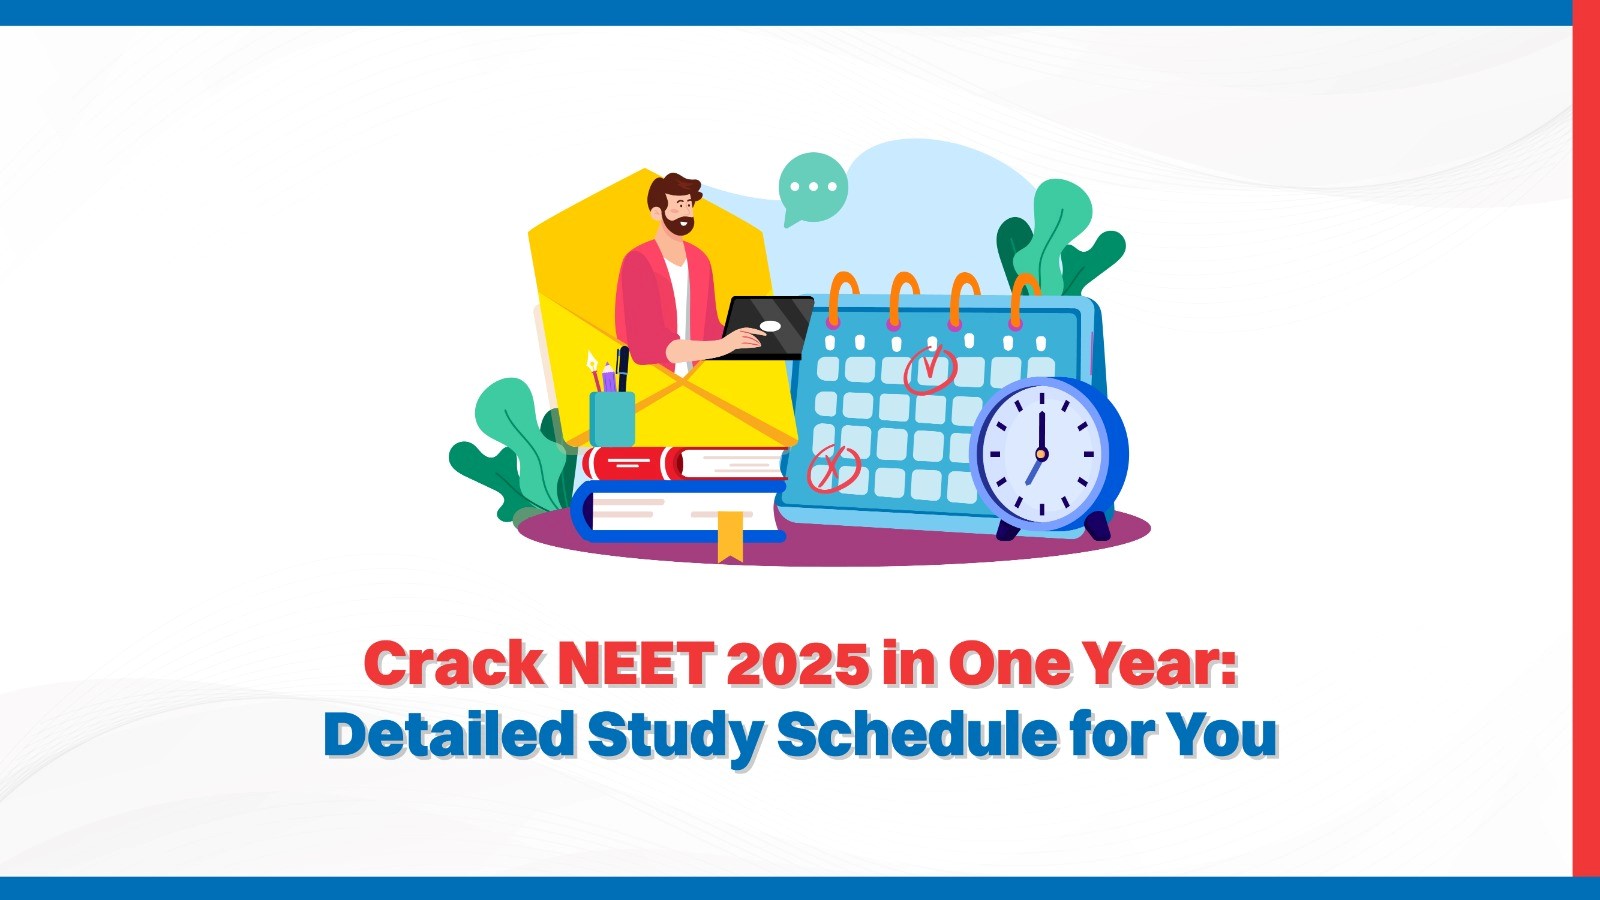 Crack NEET 2025 in One Year Detailed Study Schedule for You.jpg